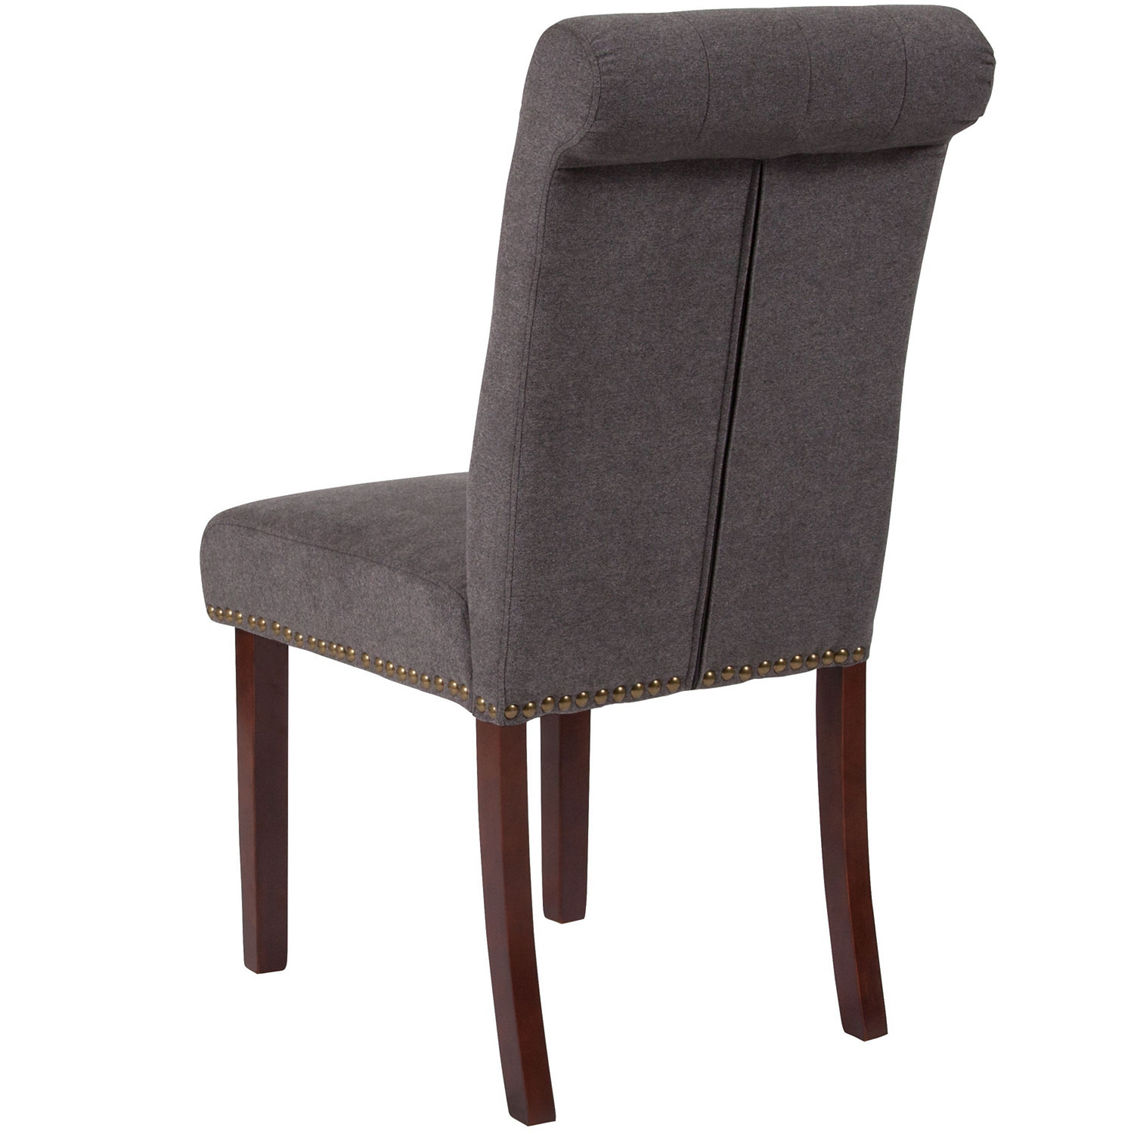 Flash Furniture HERCULES Series Parsons Chair with Rolled Back, Accent Nail Trim - Image 4 of 5